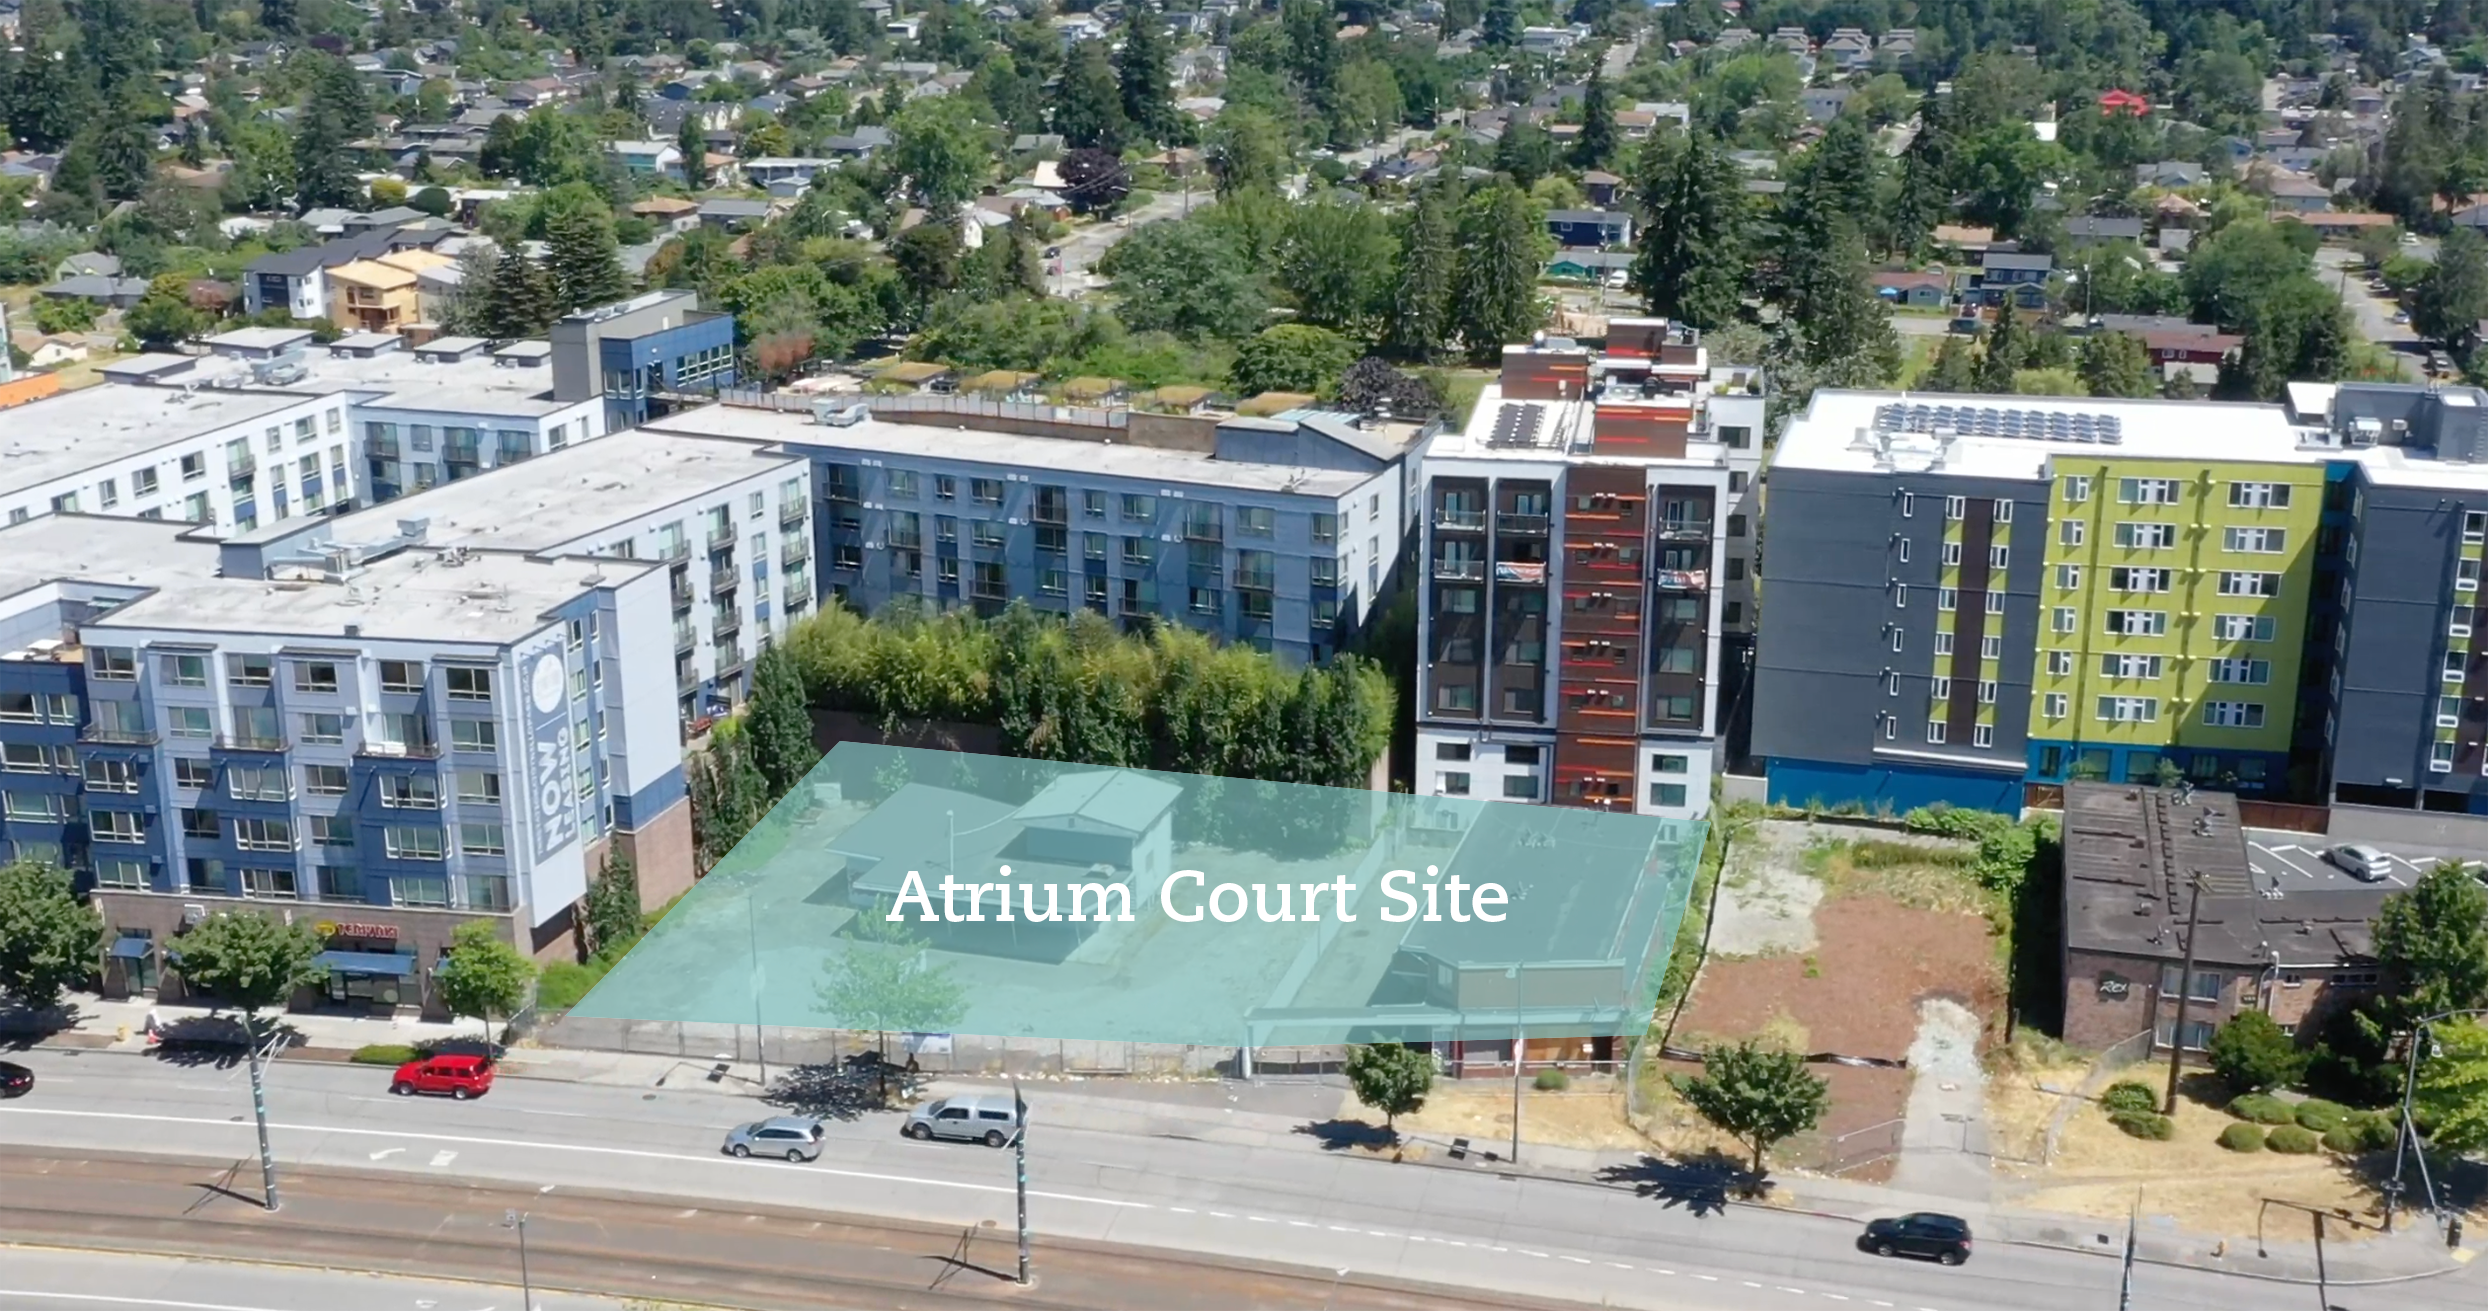 Photo of Atrium Court Site with an Overlay